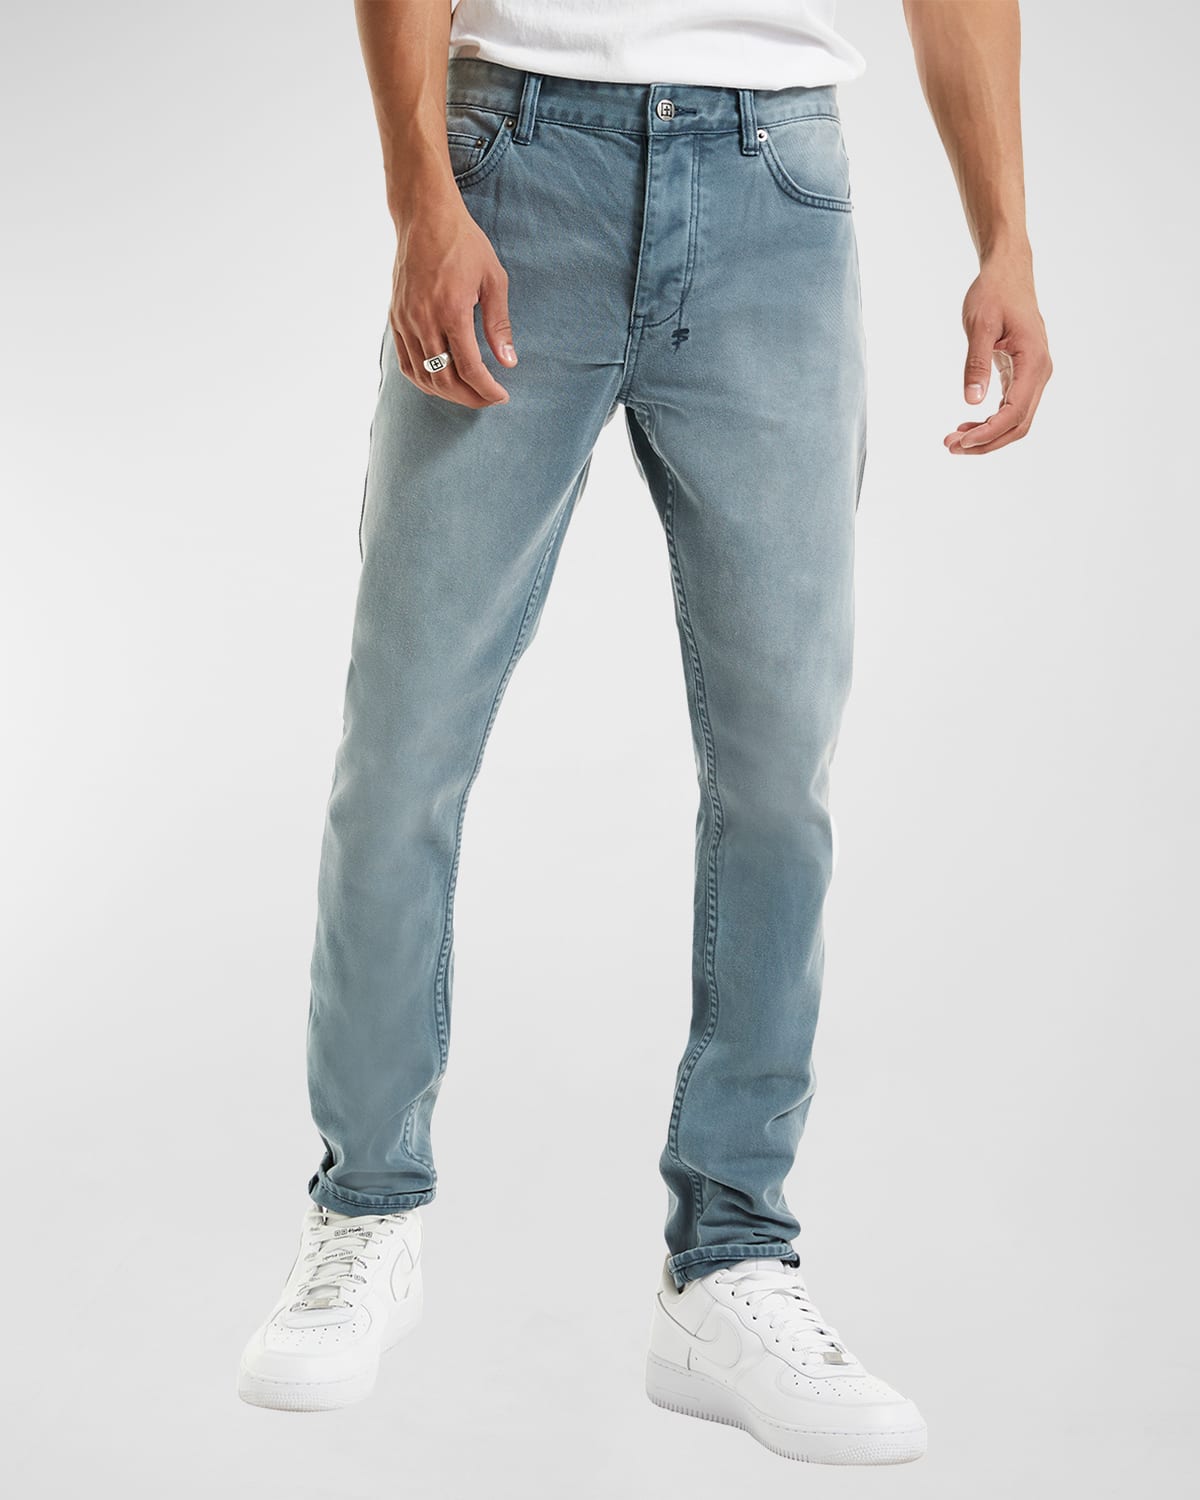 Men's Chitch Petrol Garment-Dyed Jeans